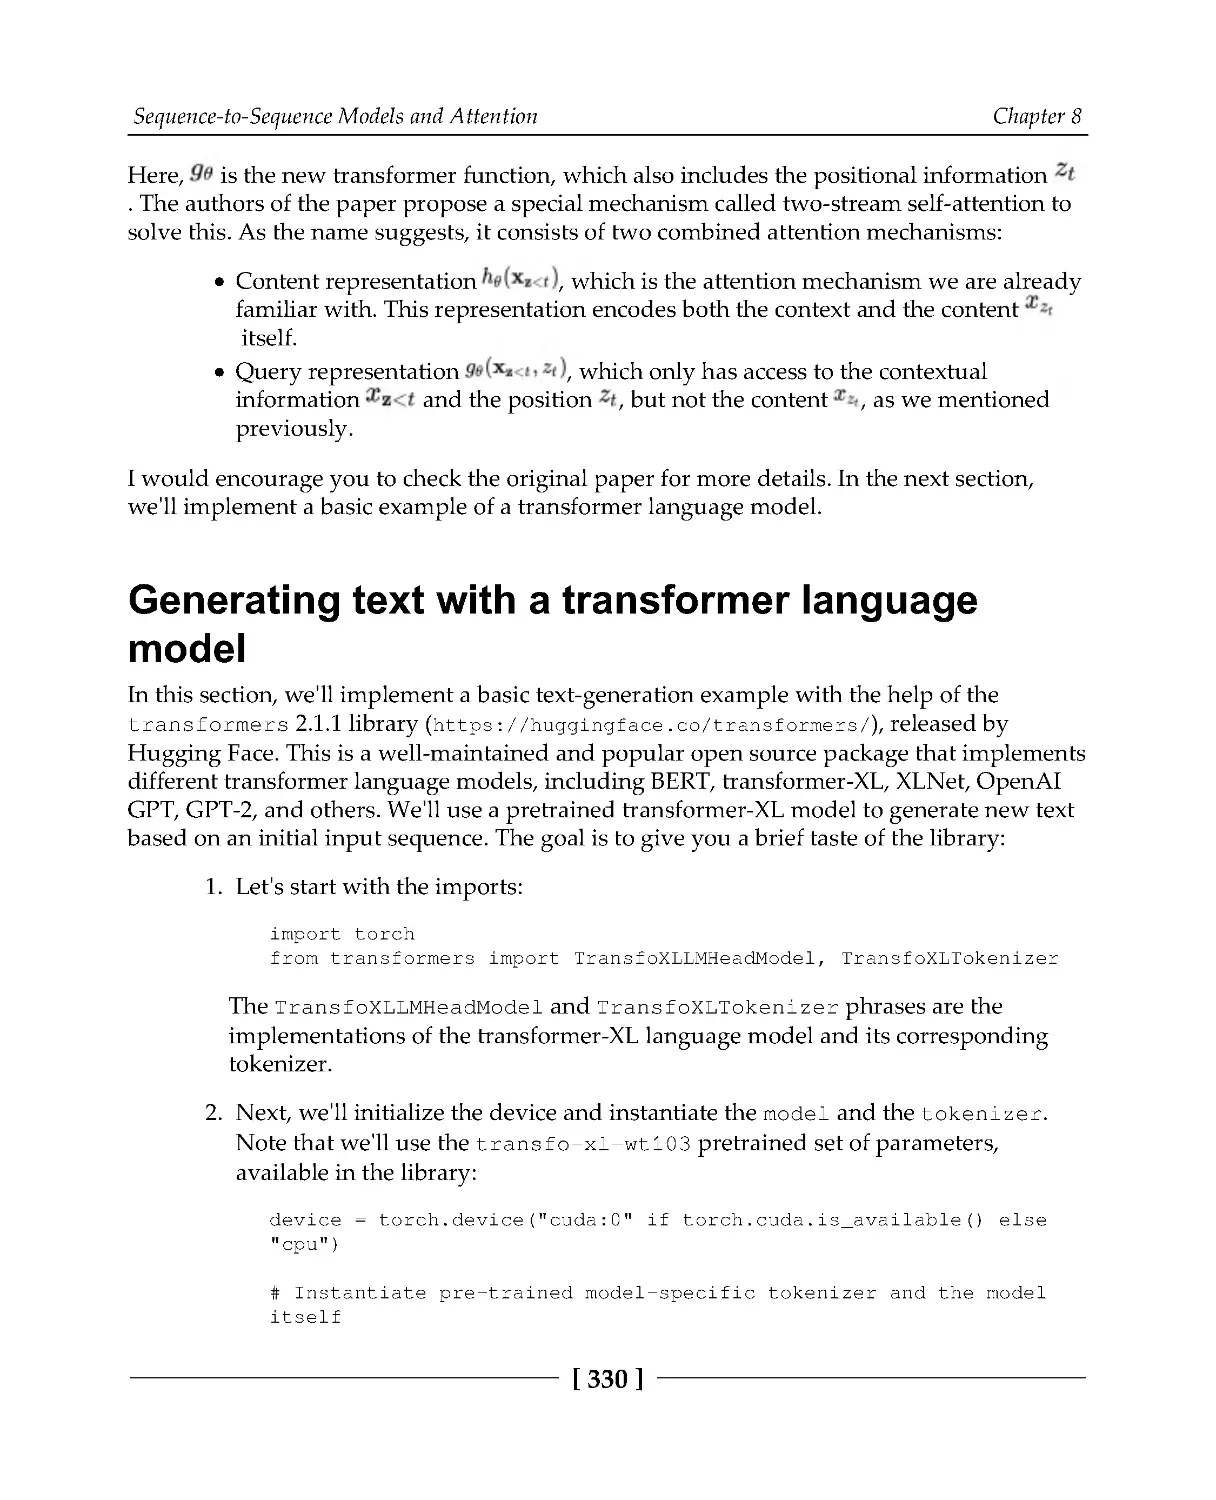 Generating text with a transformer language model